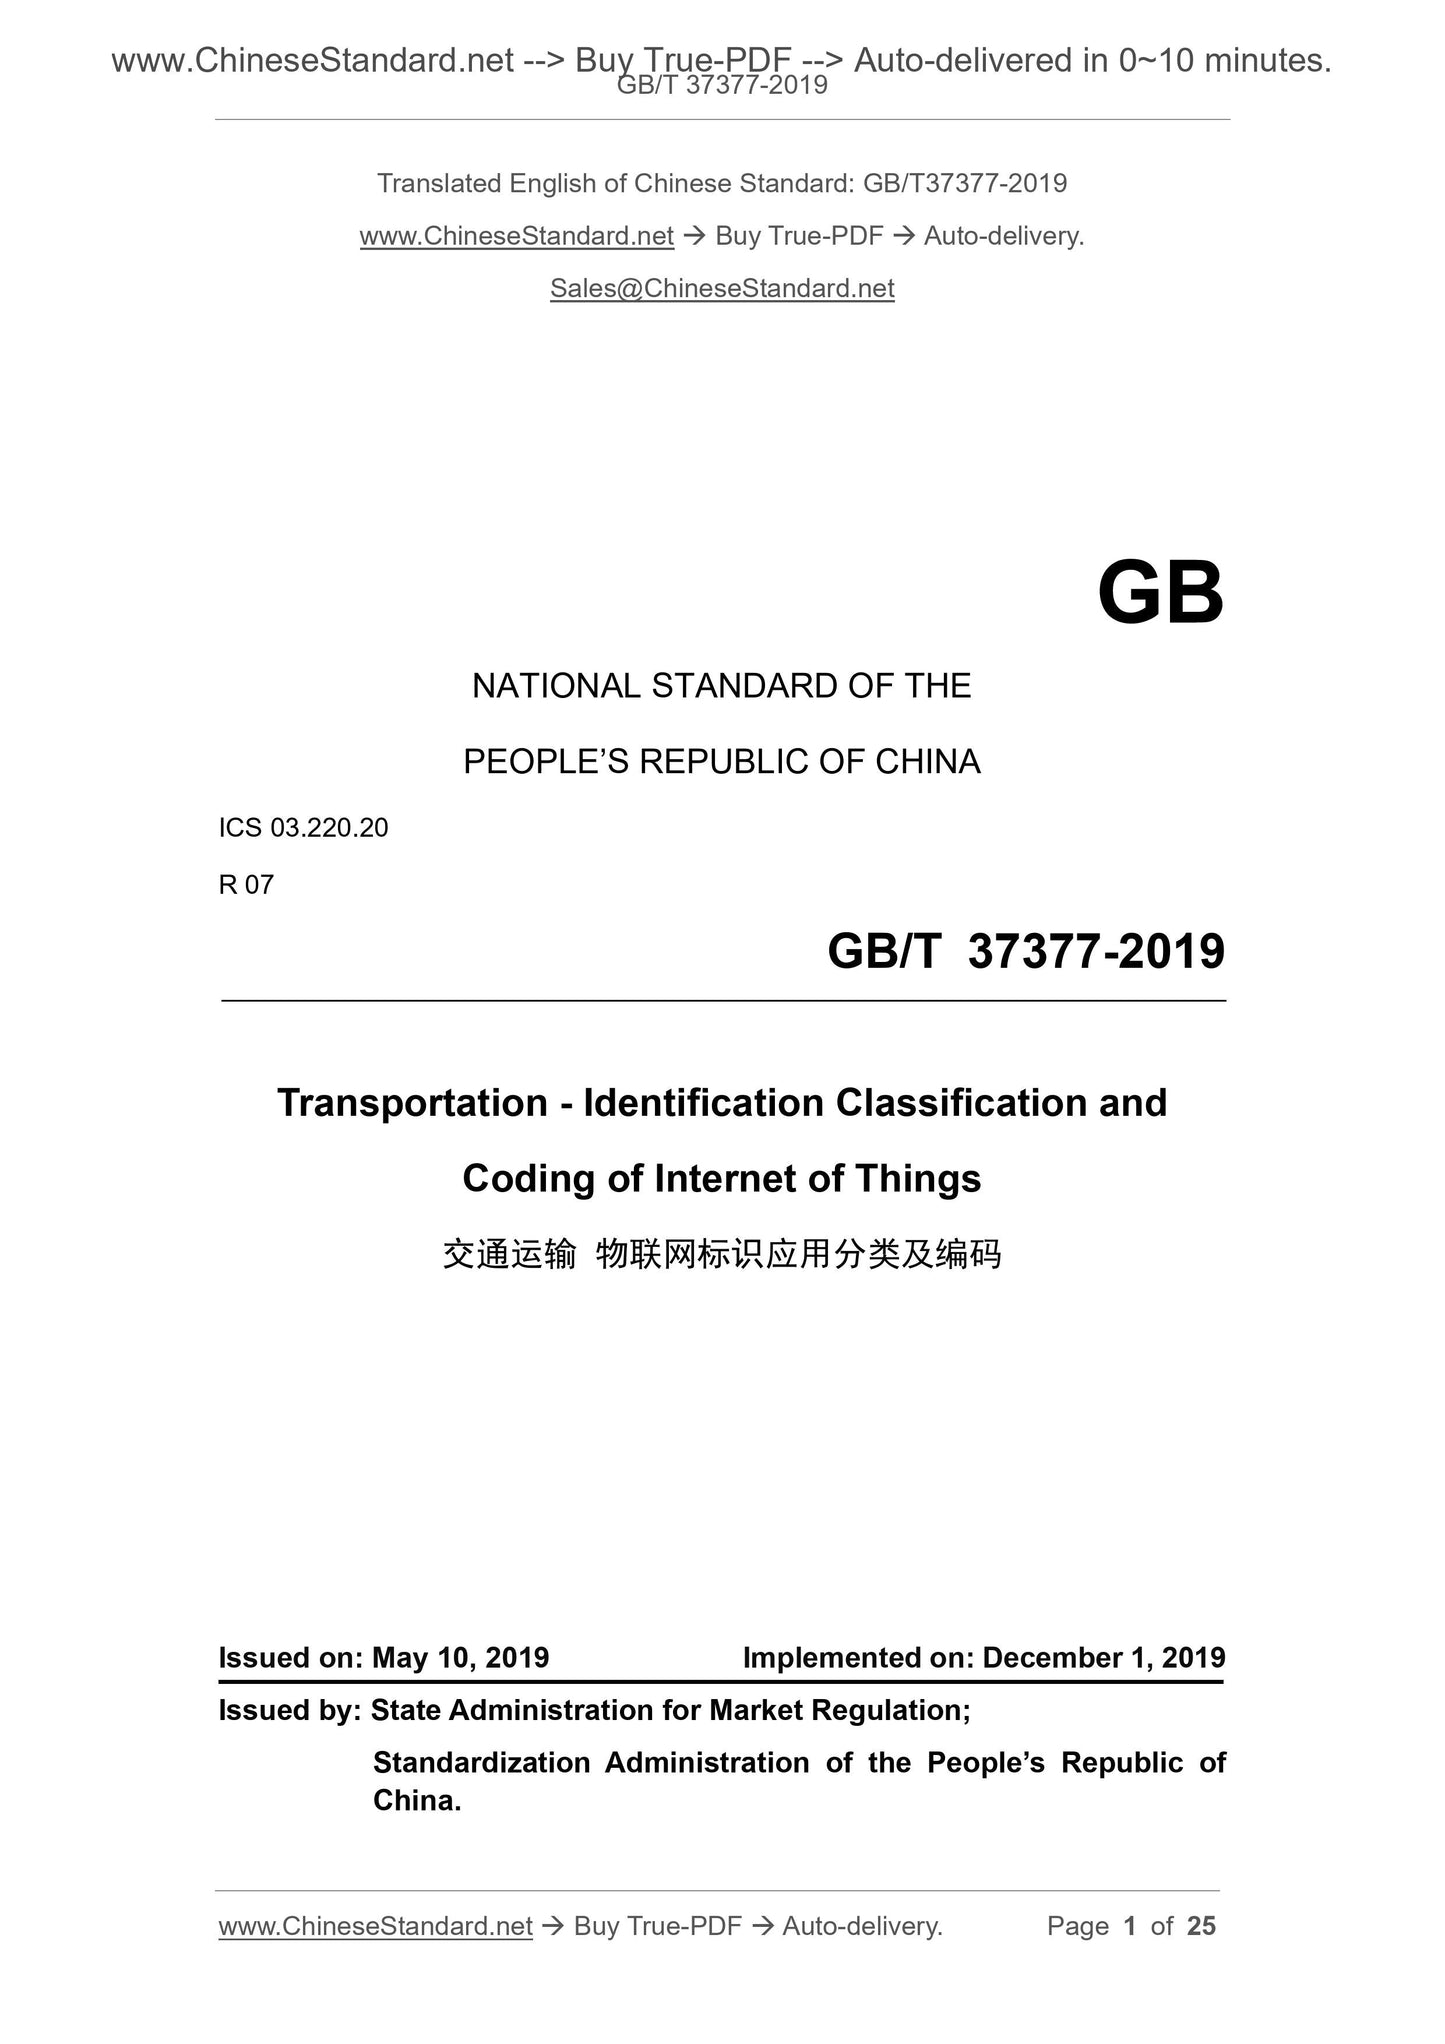 GB/T 37377-2019 Page 1